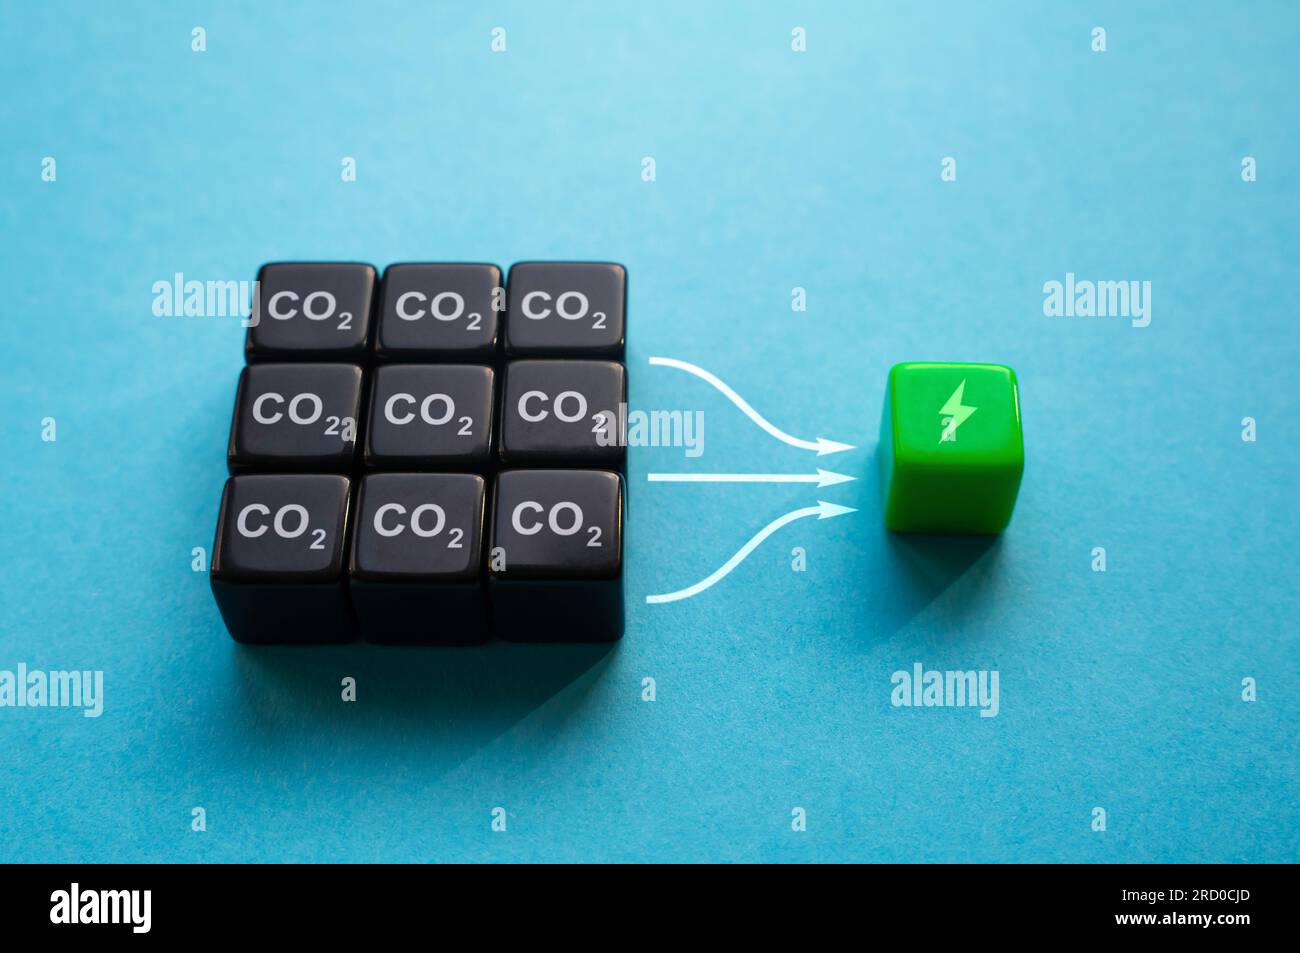 Technology for industrial processing of CO2 into energy or useful products. Eco solutions. Investment in environmental projects. Green industry. Negat Stock Photo